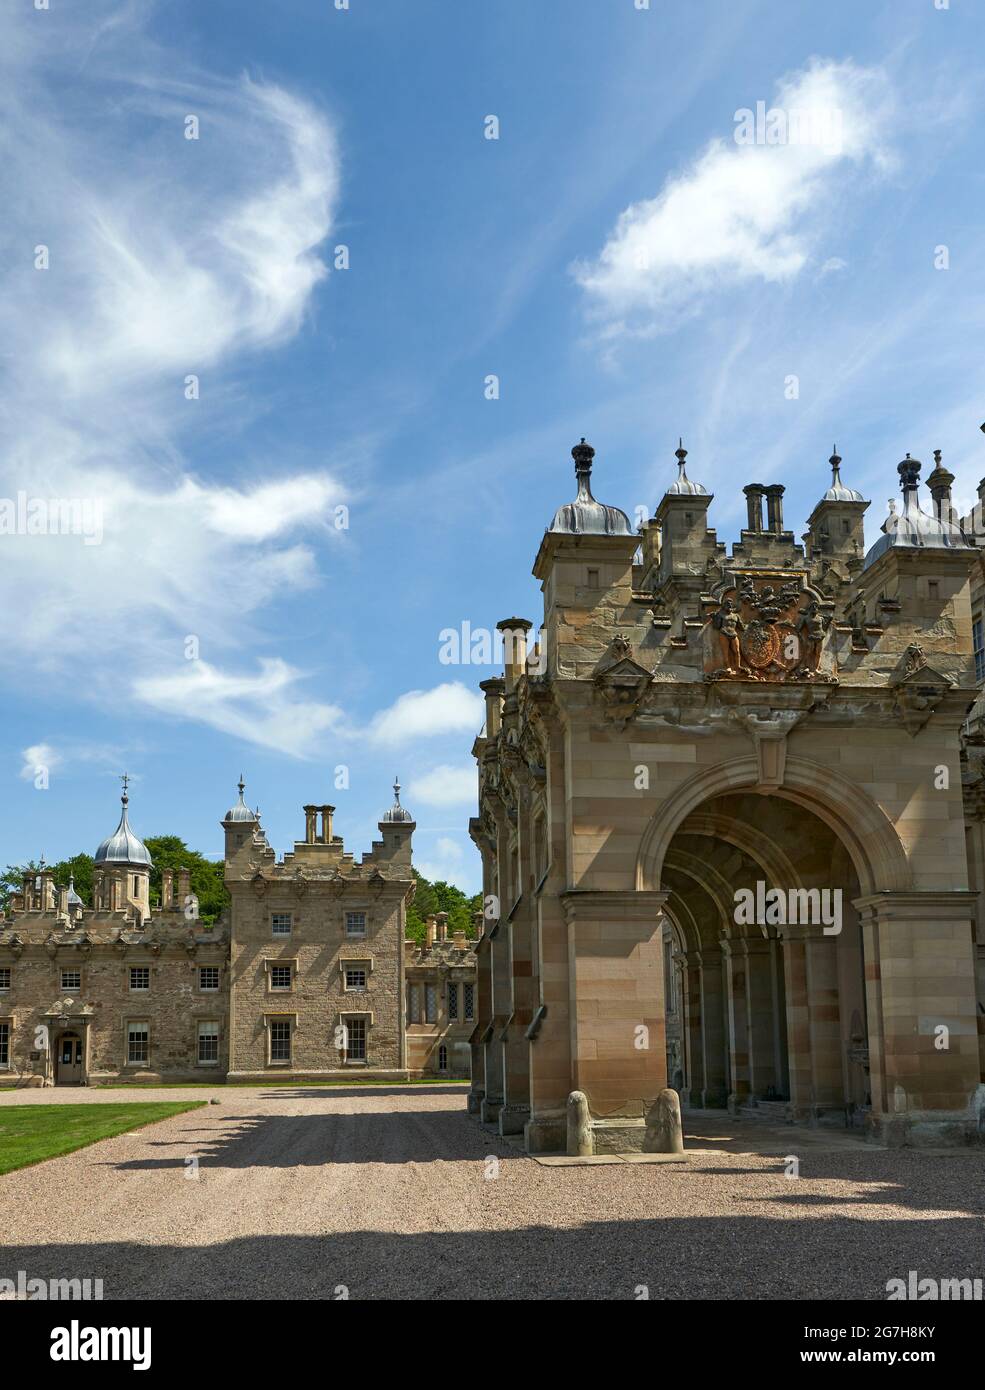 Floors Castle a stately home in the Scottish Borders described as a William Adam architectural masterpiece Stock Photo